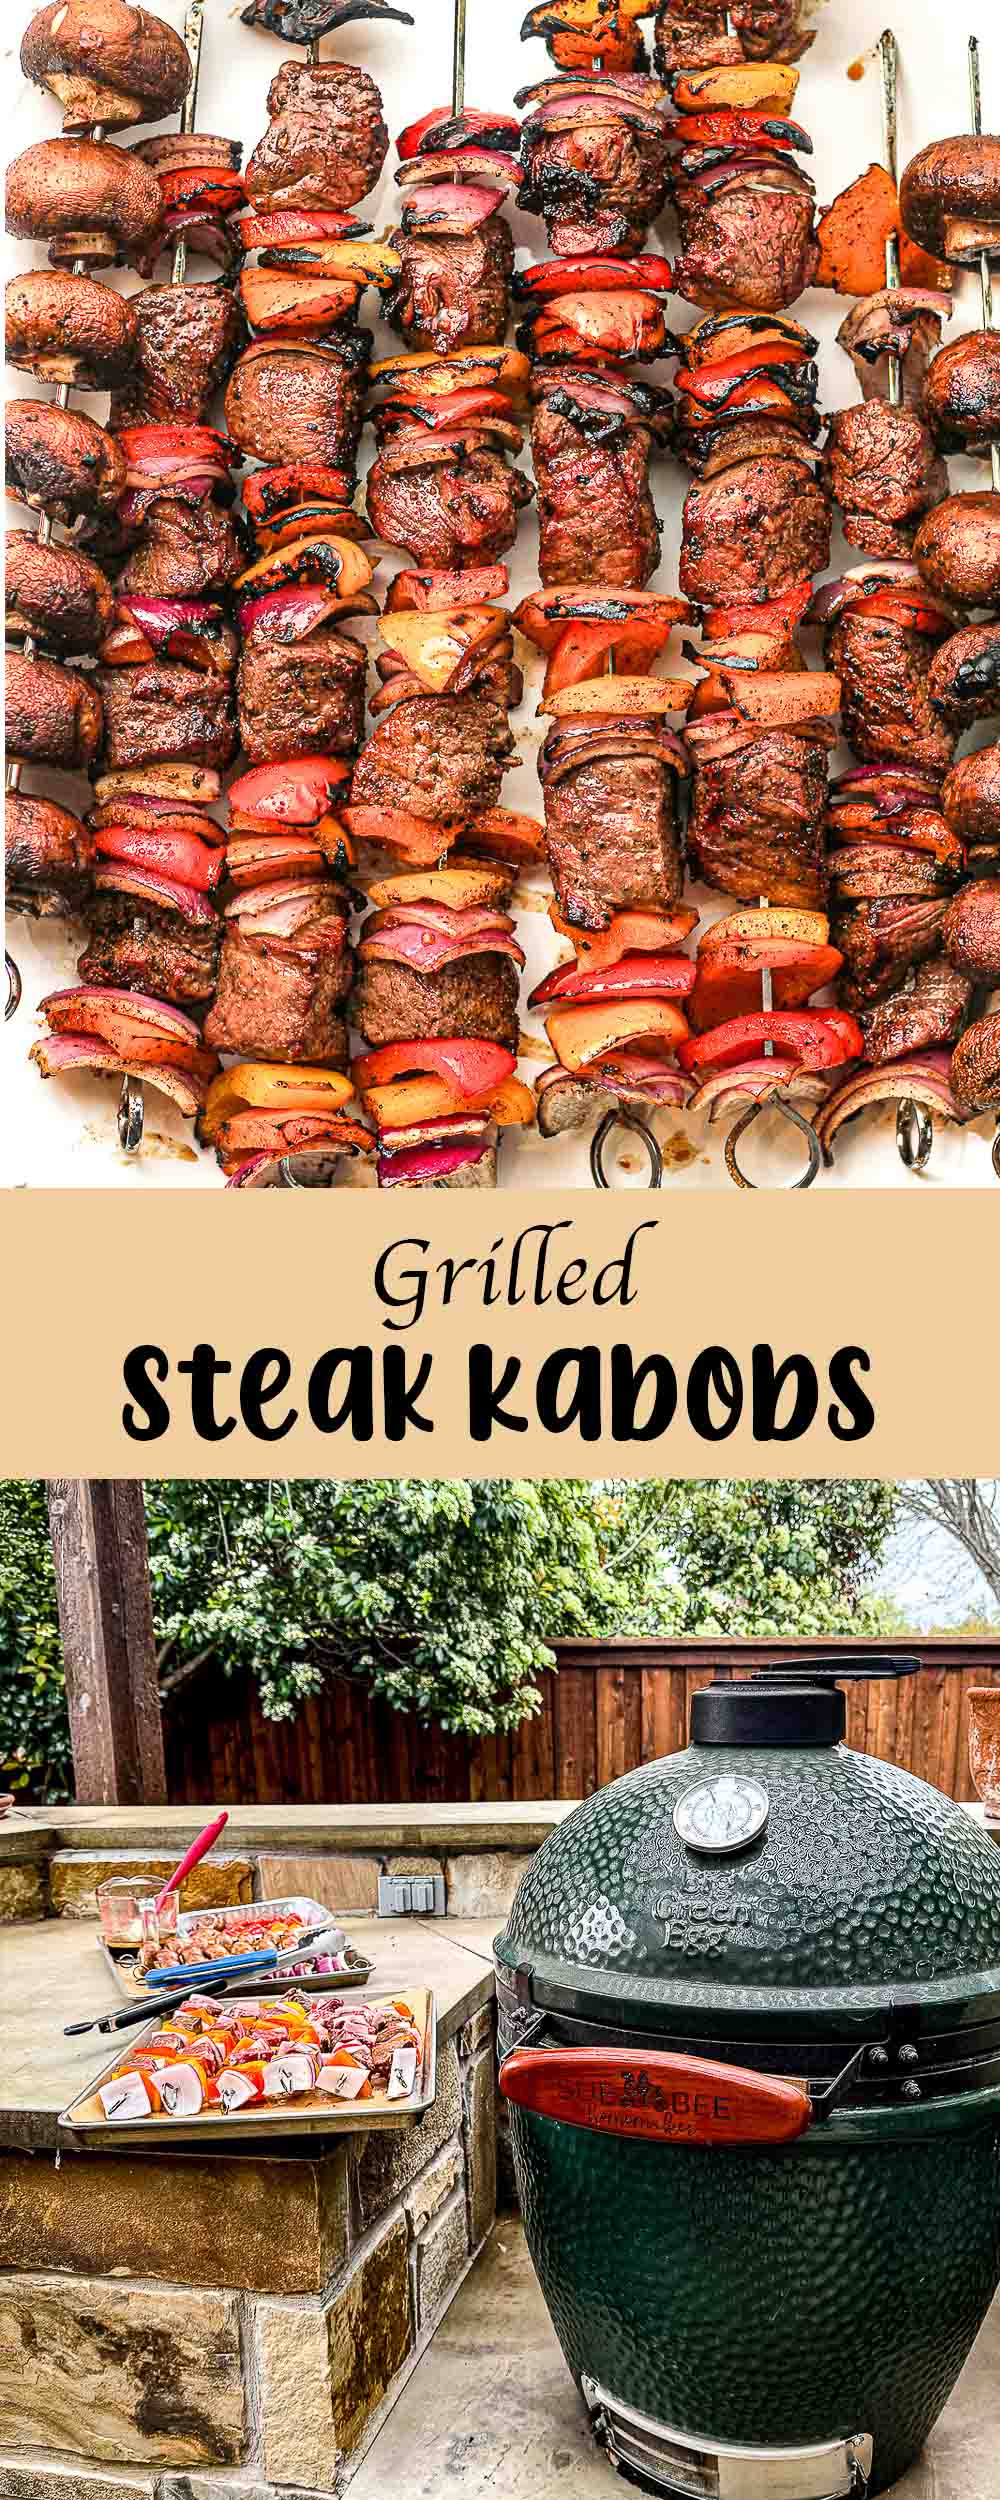 A collage of grilled steak kabobs.